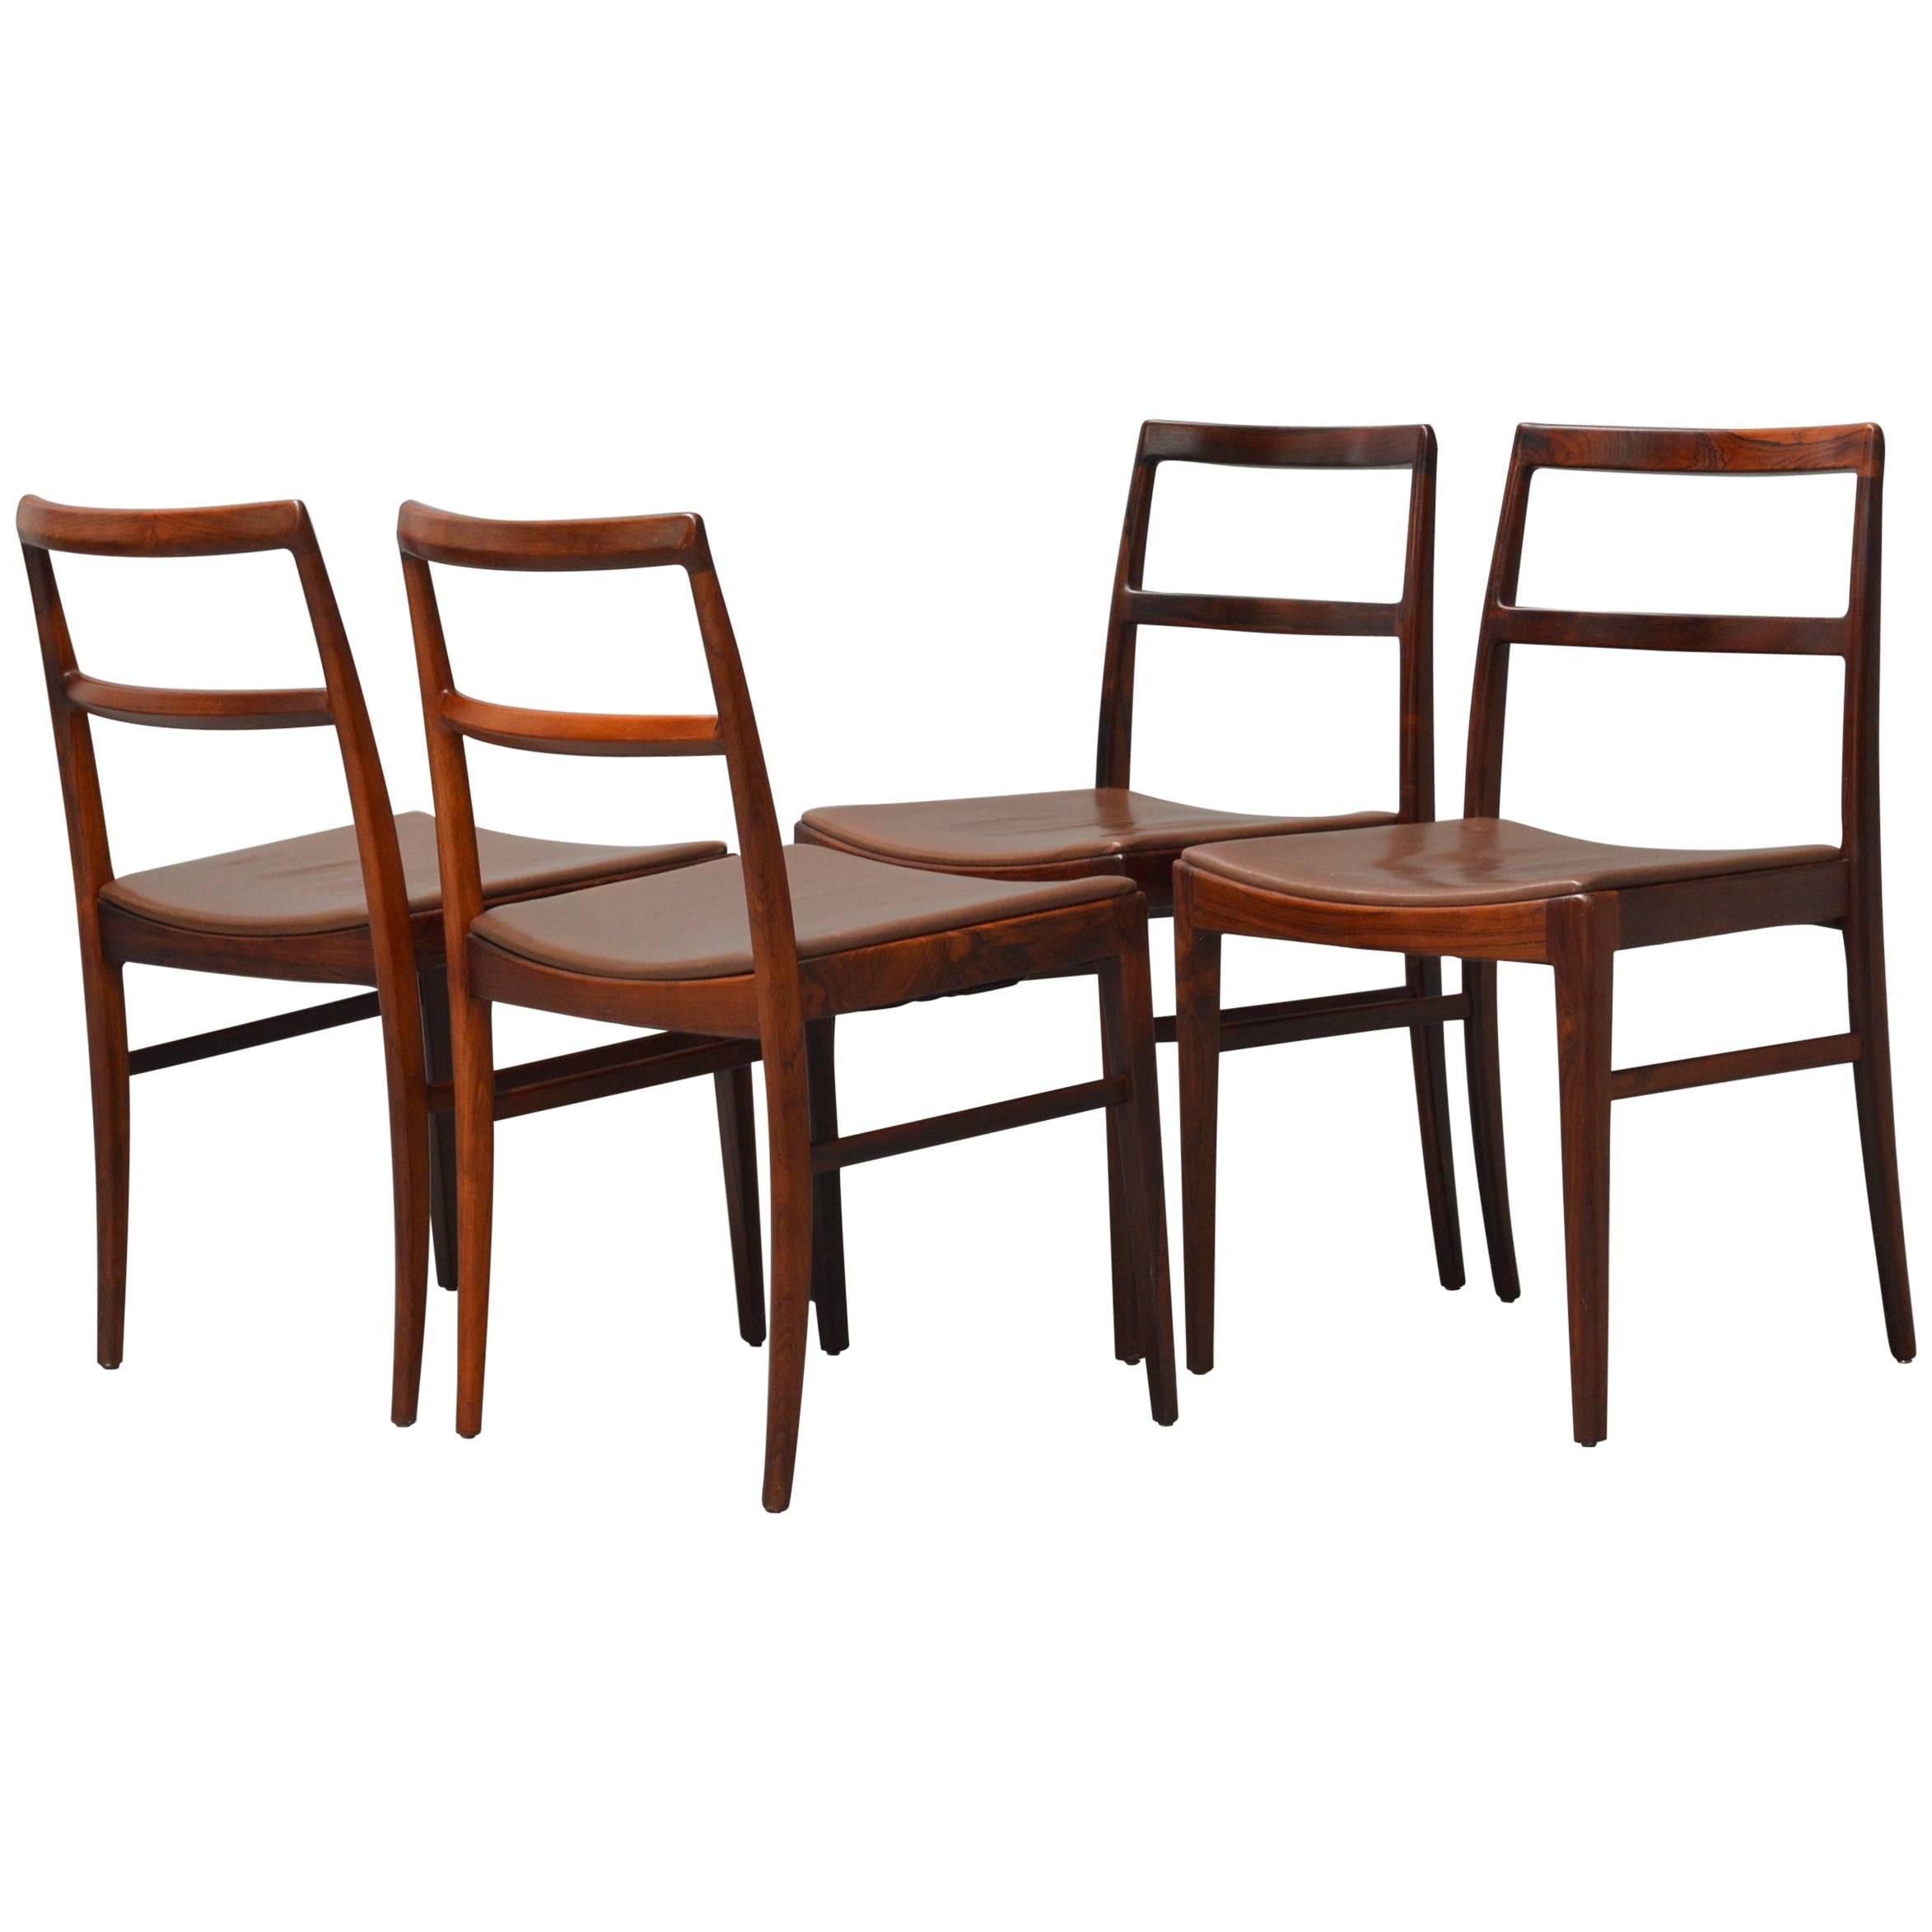 1950s Arne Vodder Rosewood Dining Chairs, Inc. Reupholstery